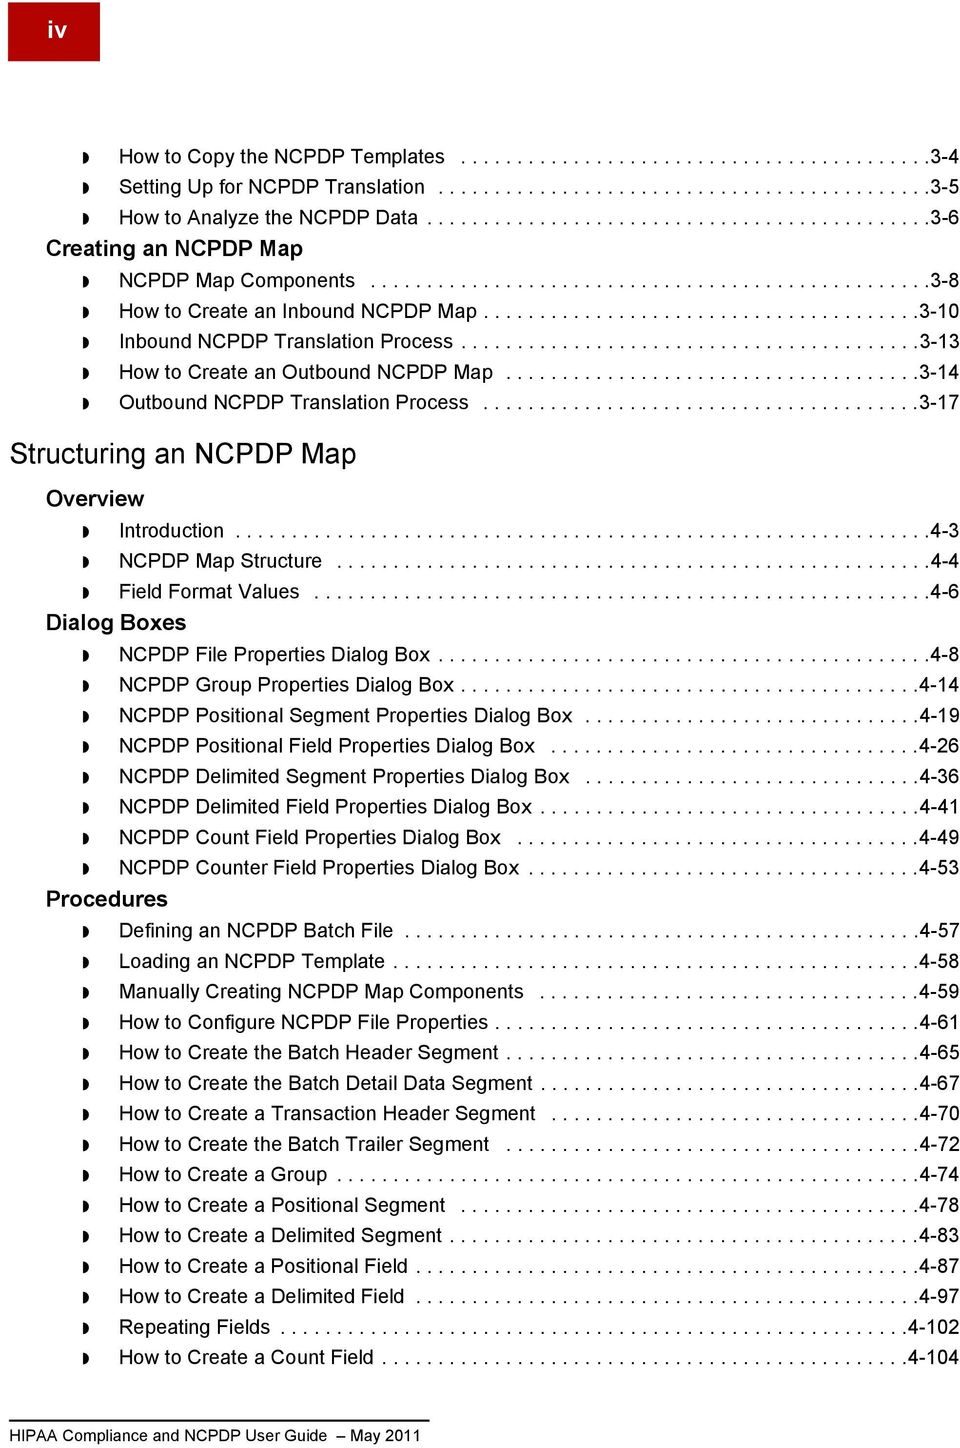 ......................................3-10 Inbound NCPDP Translation Process.........................................3-13 How to Create an Outbound NCPDP Map.....................................3-14 Outbound NCPDP Translation Process.